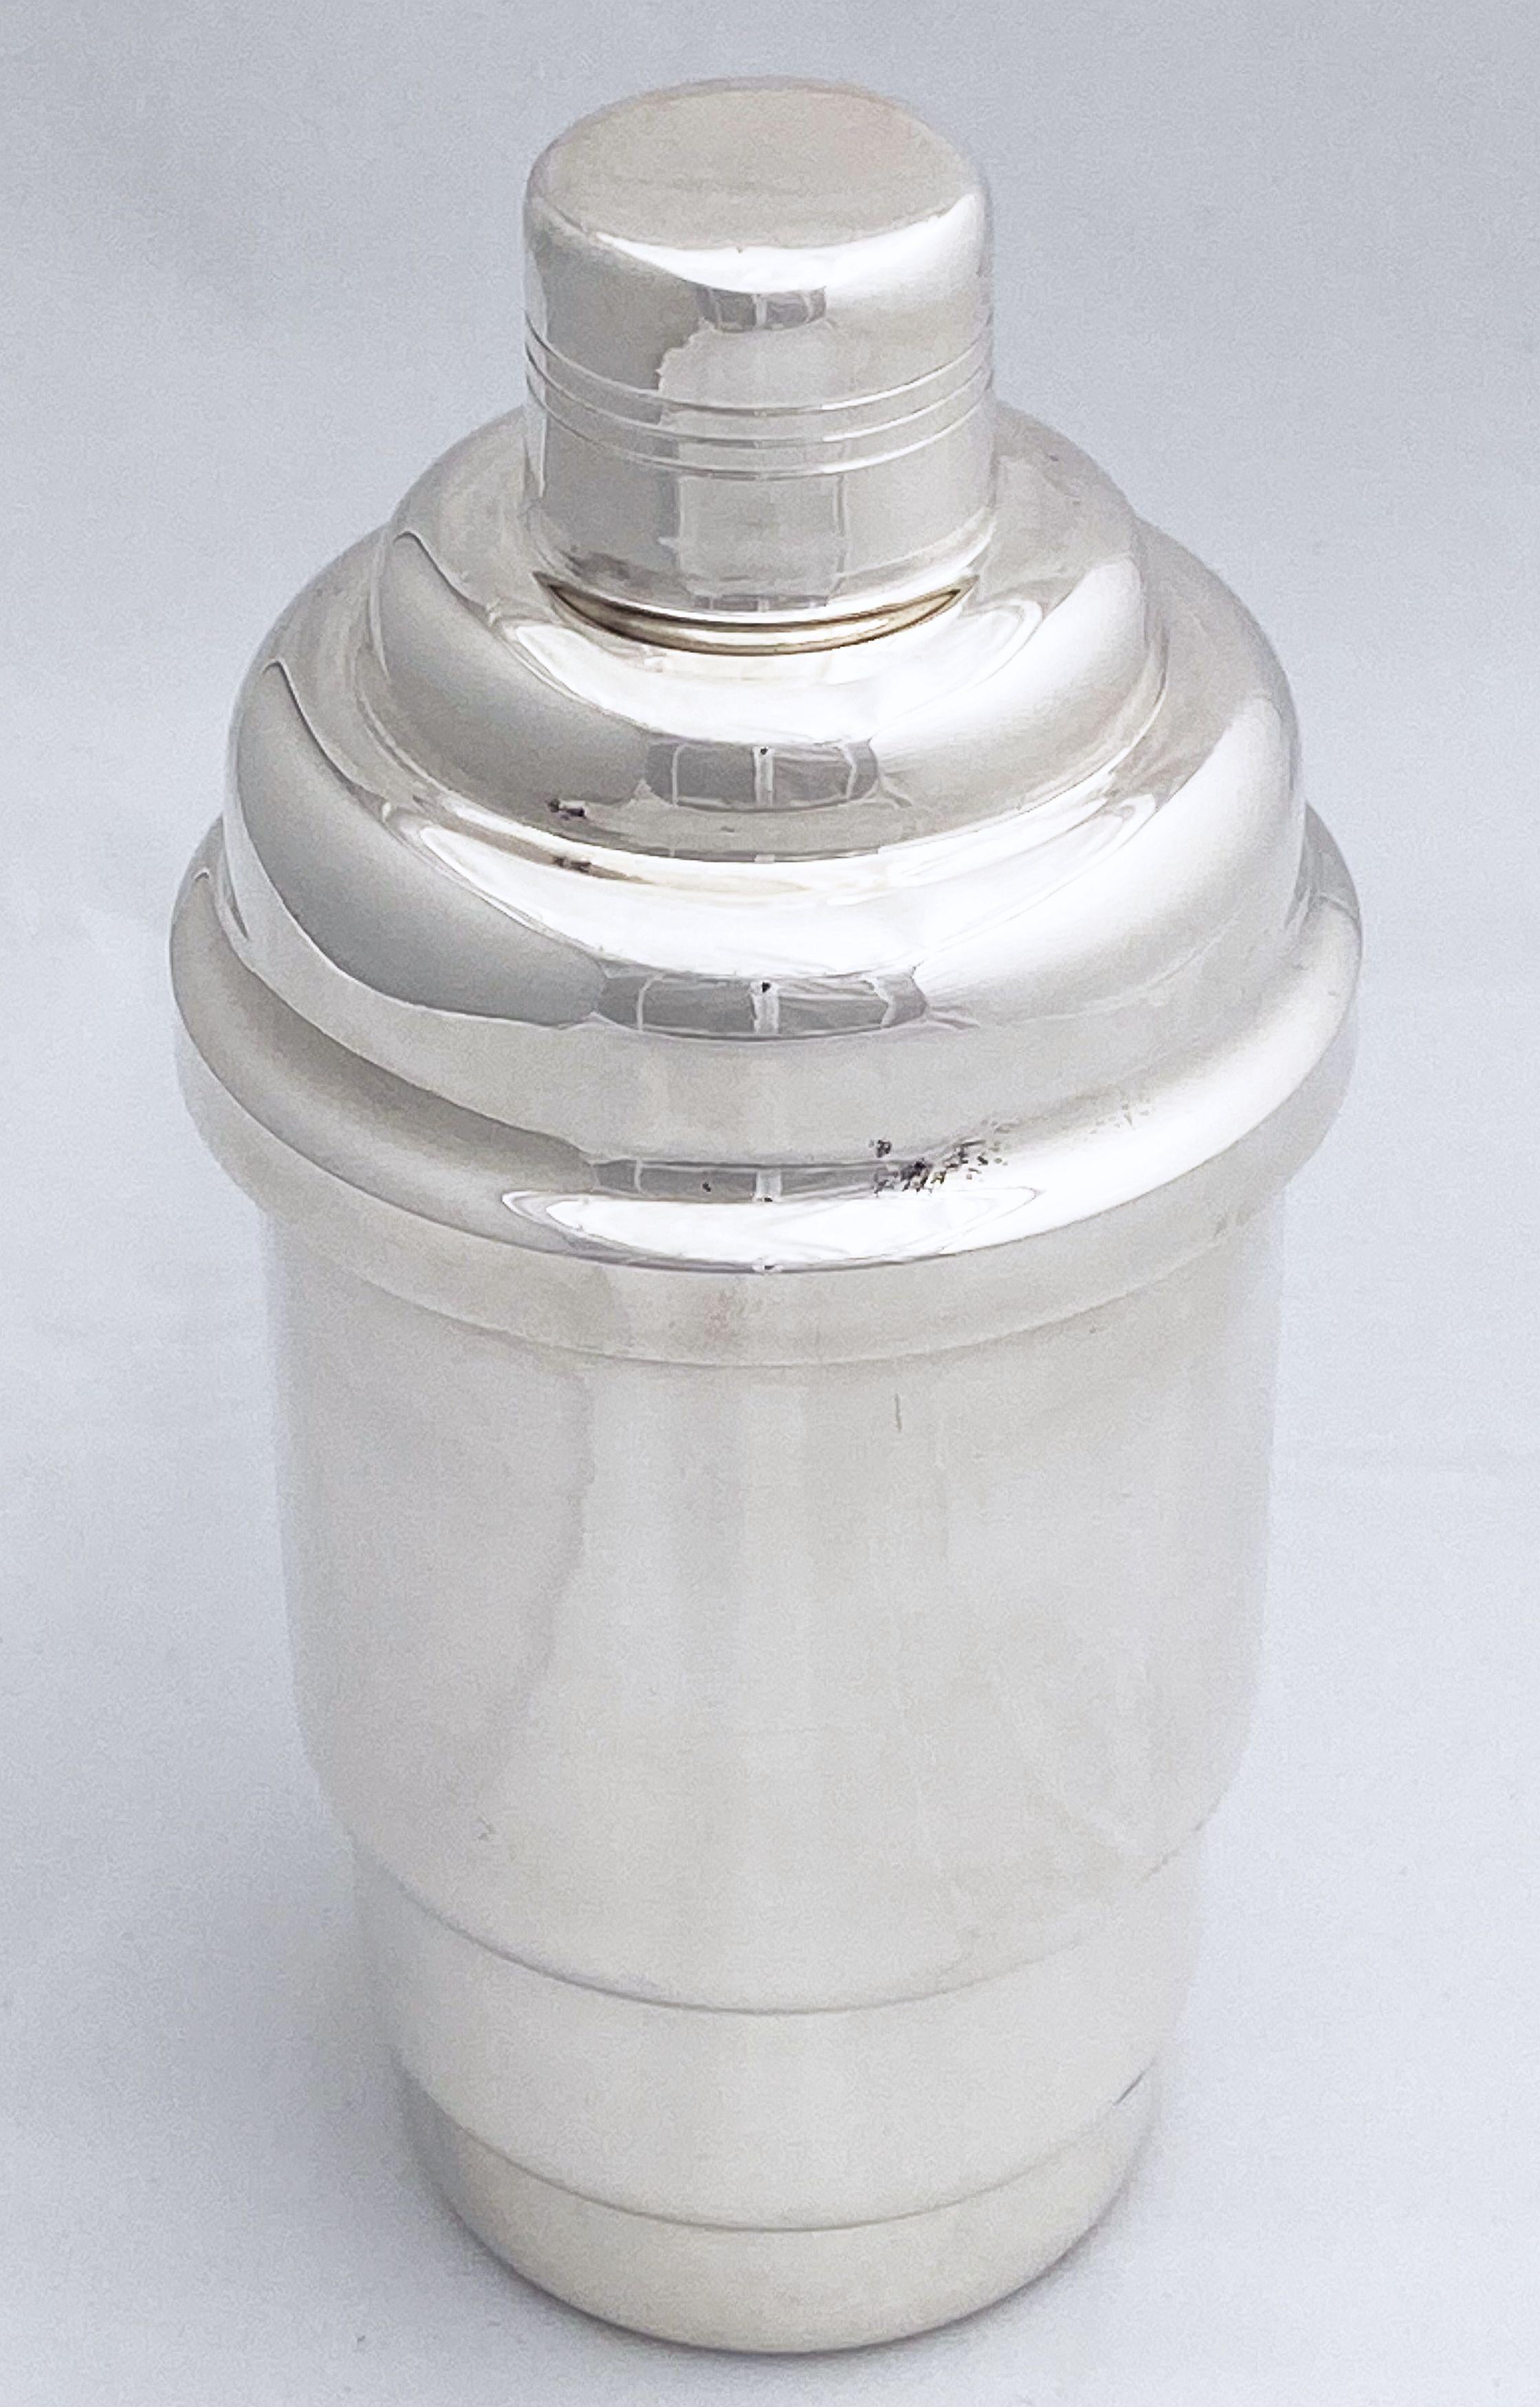 An authentic French cylindrical martini or cocktail shaker of fine plate silver, featuring Art Deco styling of graduating concentric circles, with removable cap and strainer.